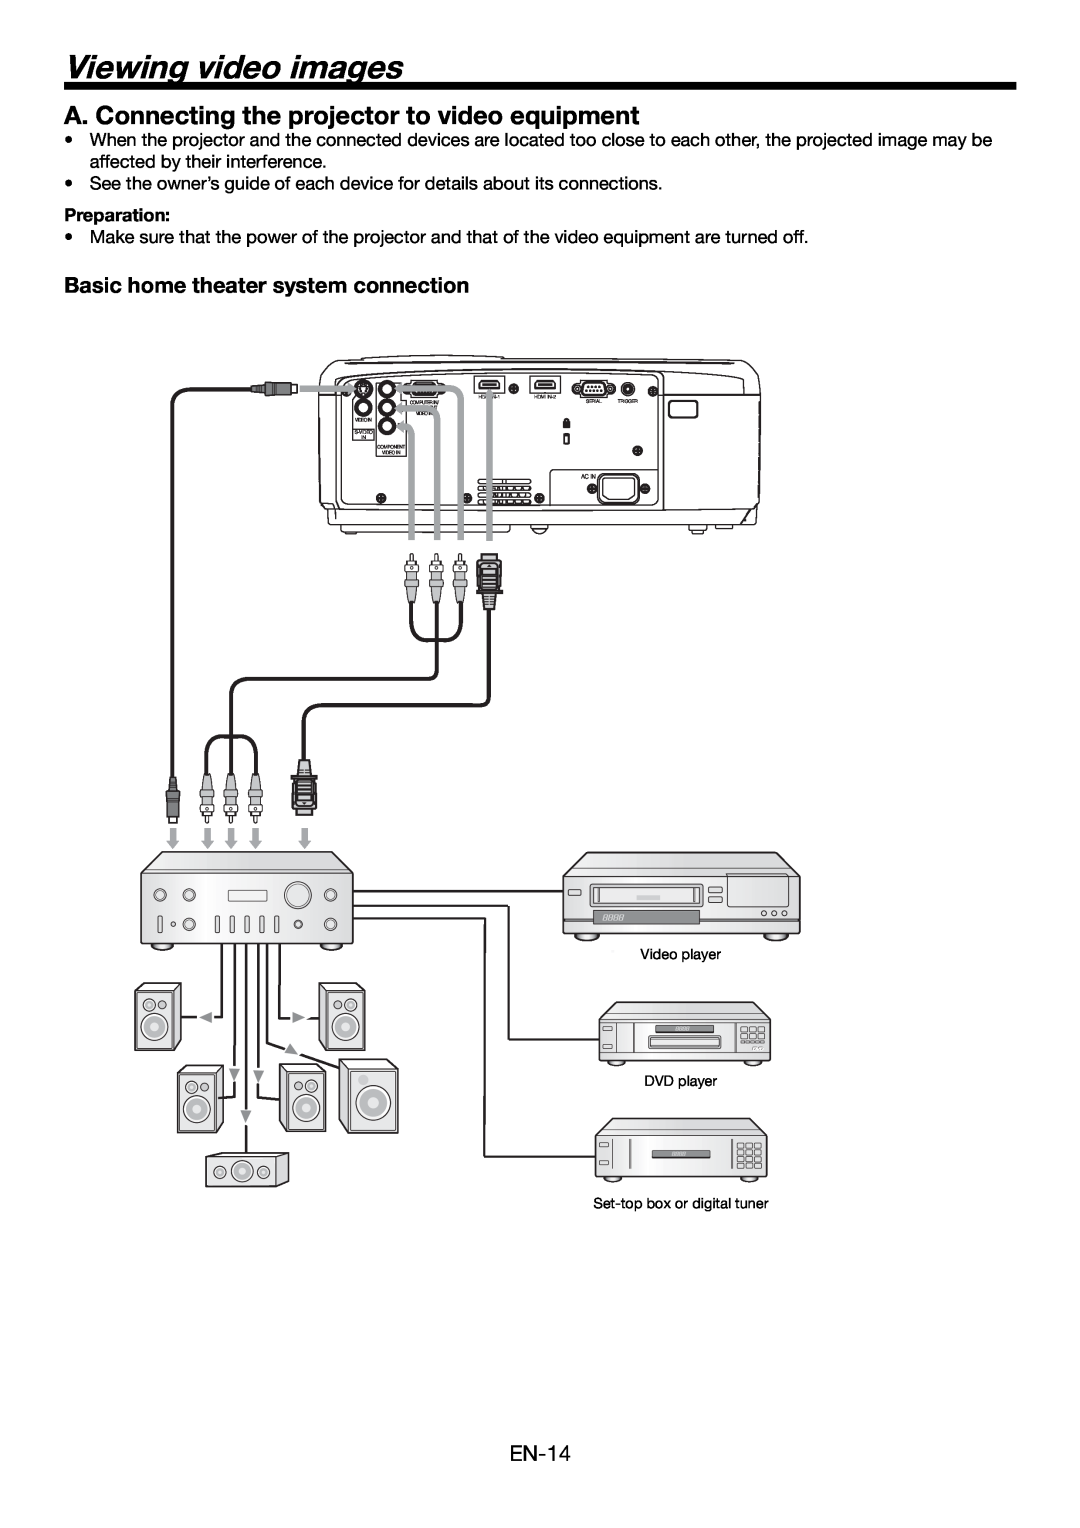 Mitsubishi Electronics HC6000 user manual Viewing video images, A. Connecting the projector to video equipment, Preparation 